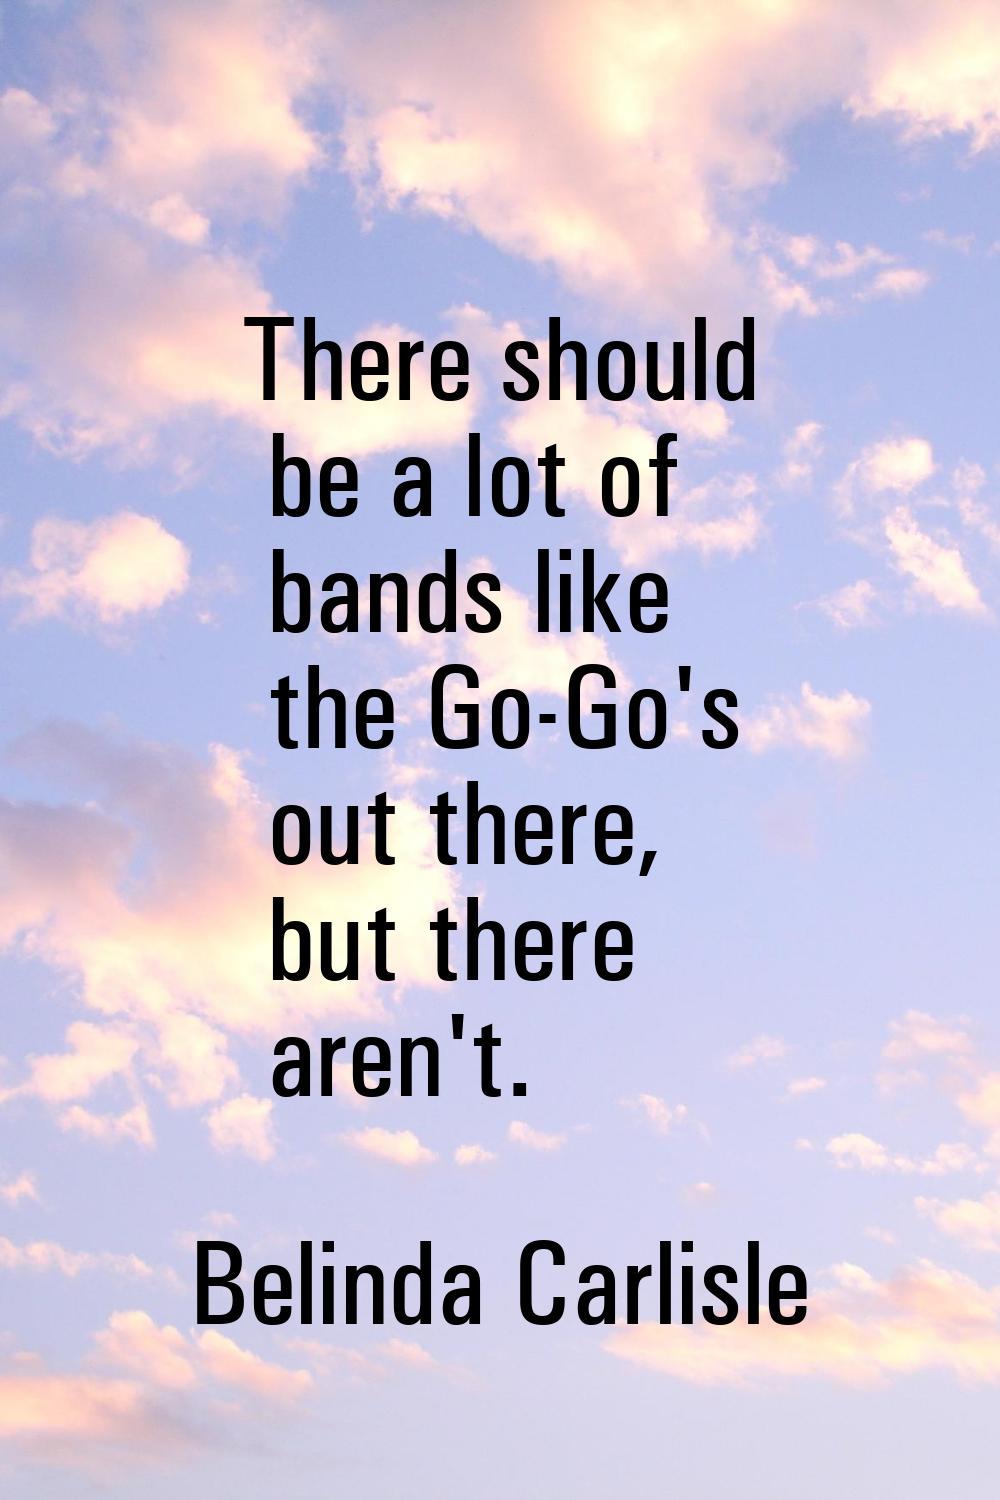 There should be a lot of bands like the Go-Go's out there, but there aren't.